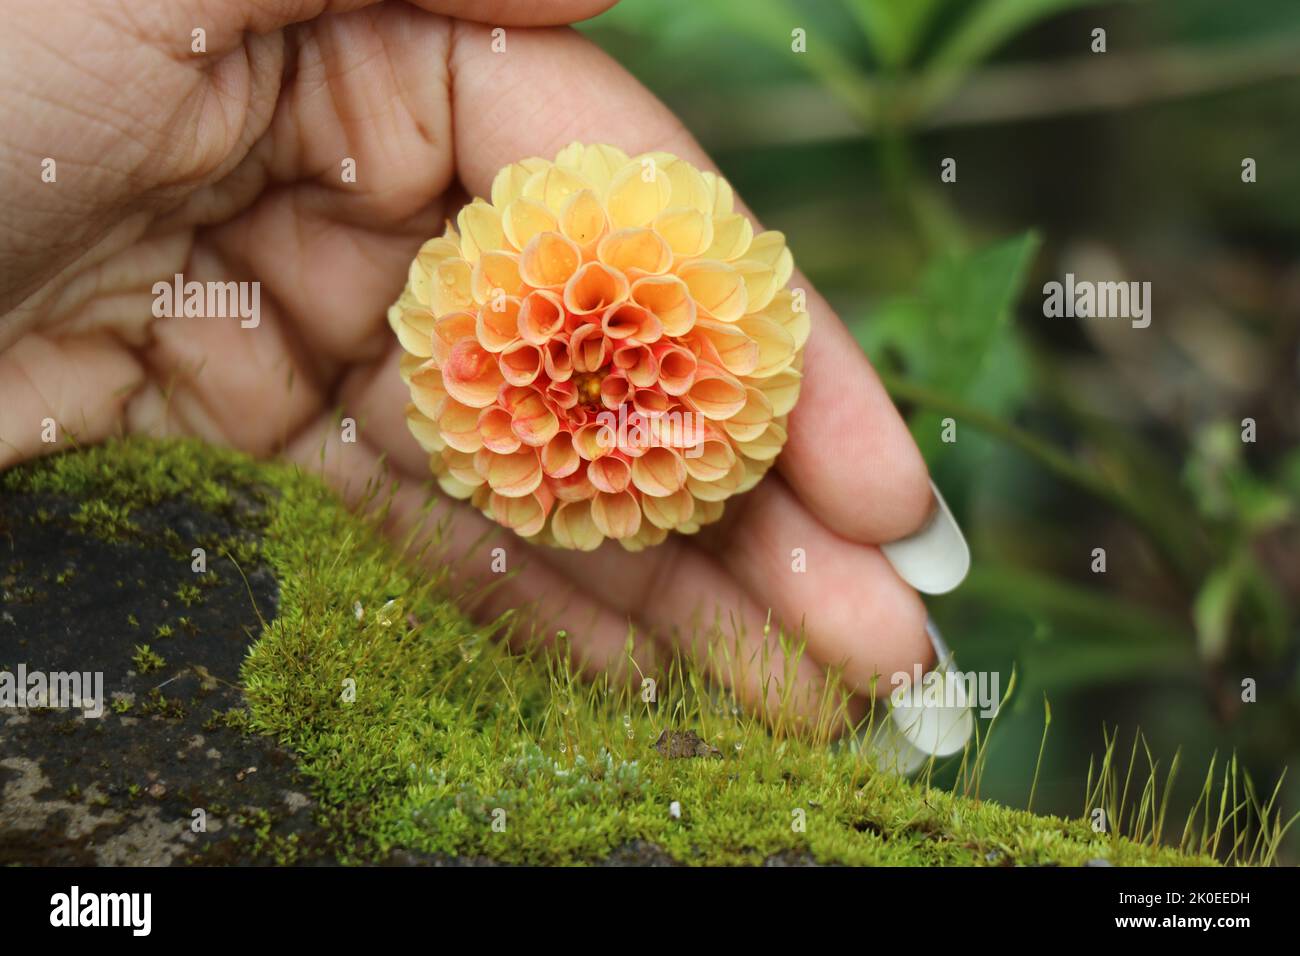 Orange and yellow mix dahlia flower blooming, Concept of protecting flowers shown by holding flower in beautiful hands on nature background Stock Photo